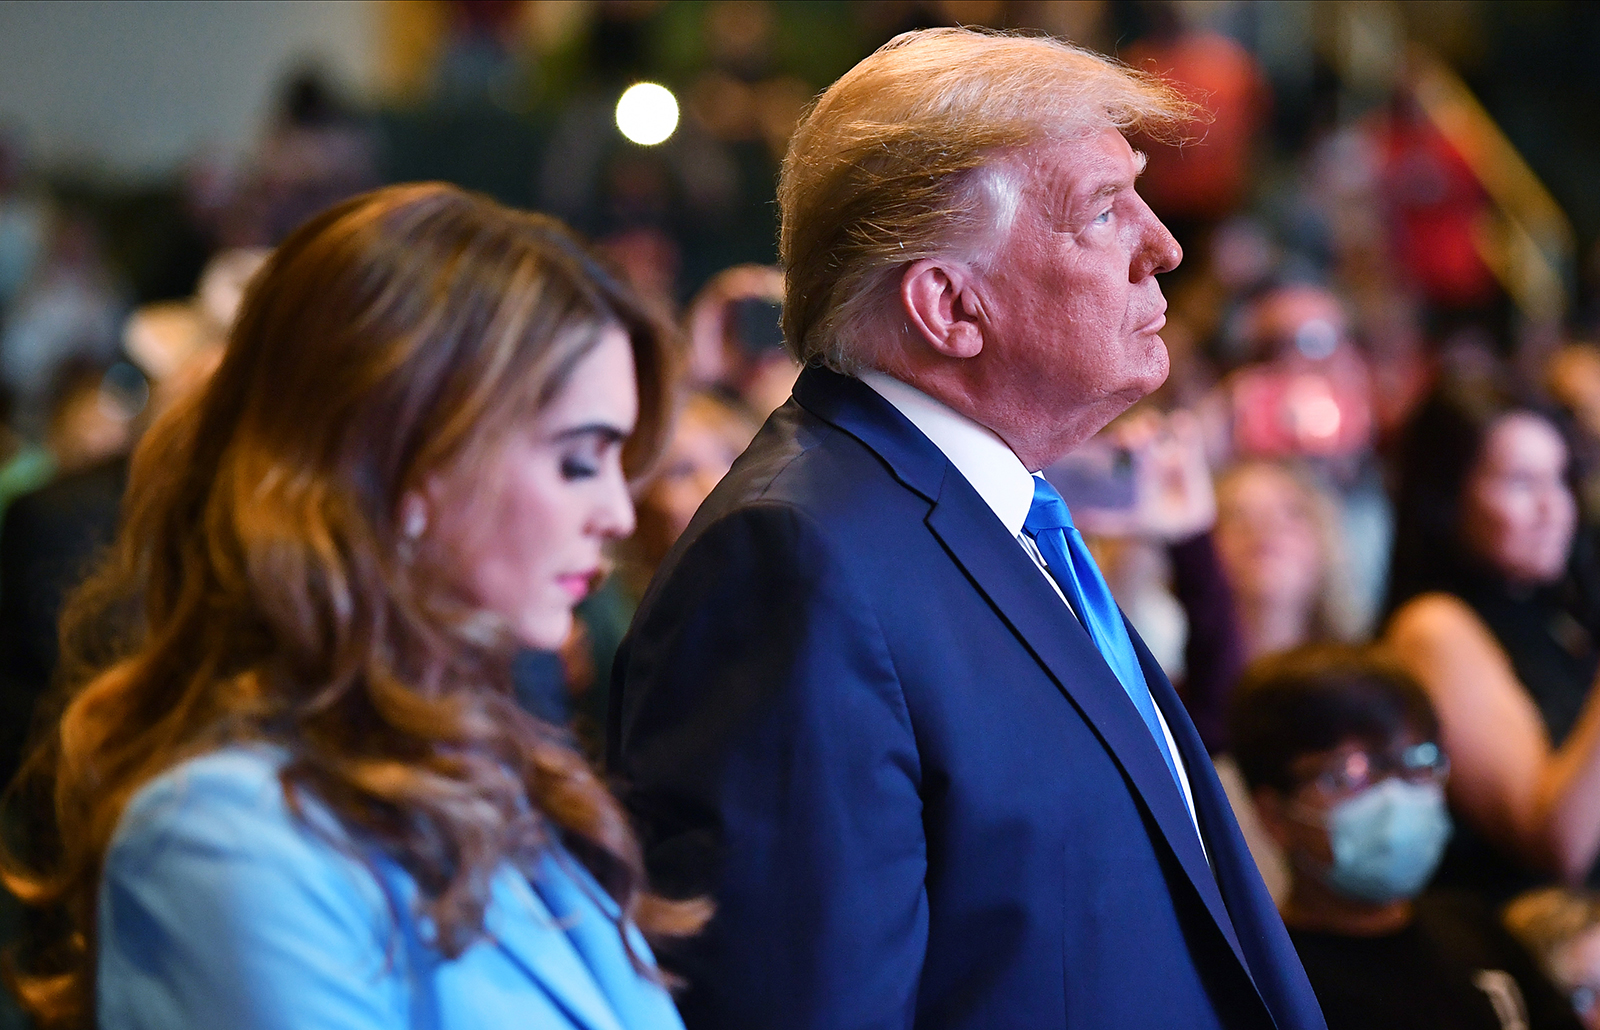 Hope Hicks, senior adviser to the president, attends services with US President Donald Trump at the International Church of Las Vegas in Las Vegas, Nevada, on October 18.